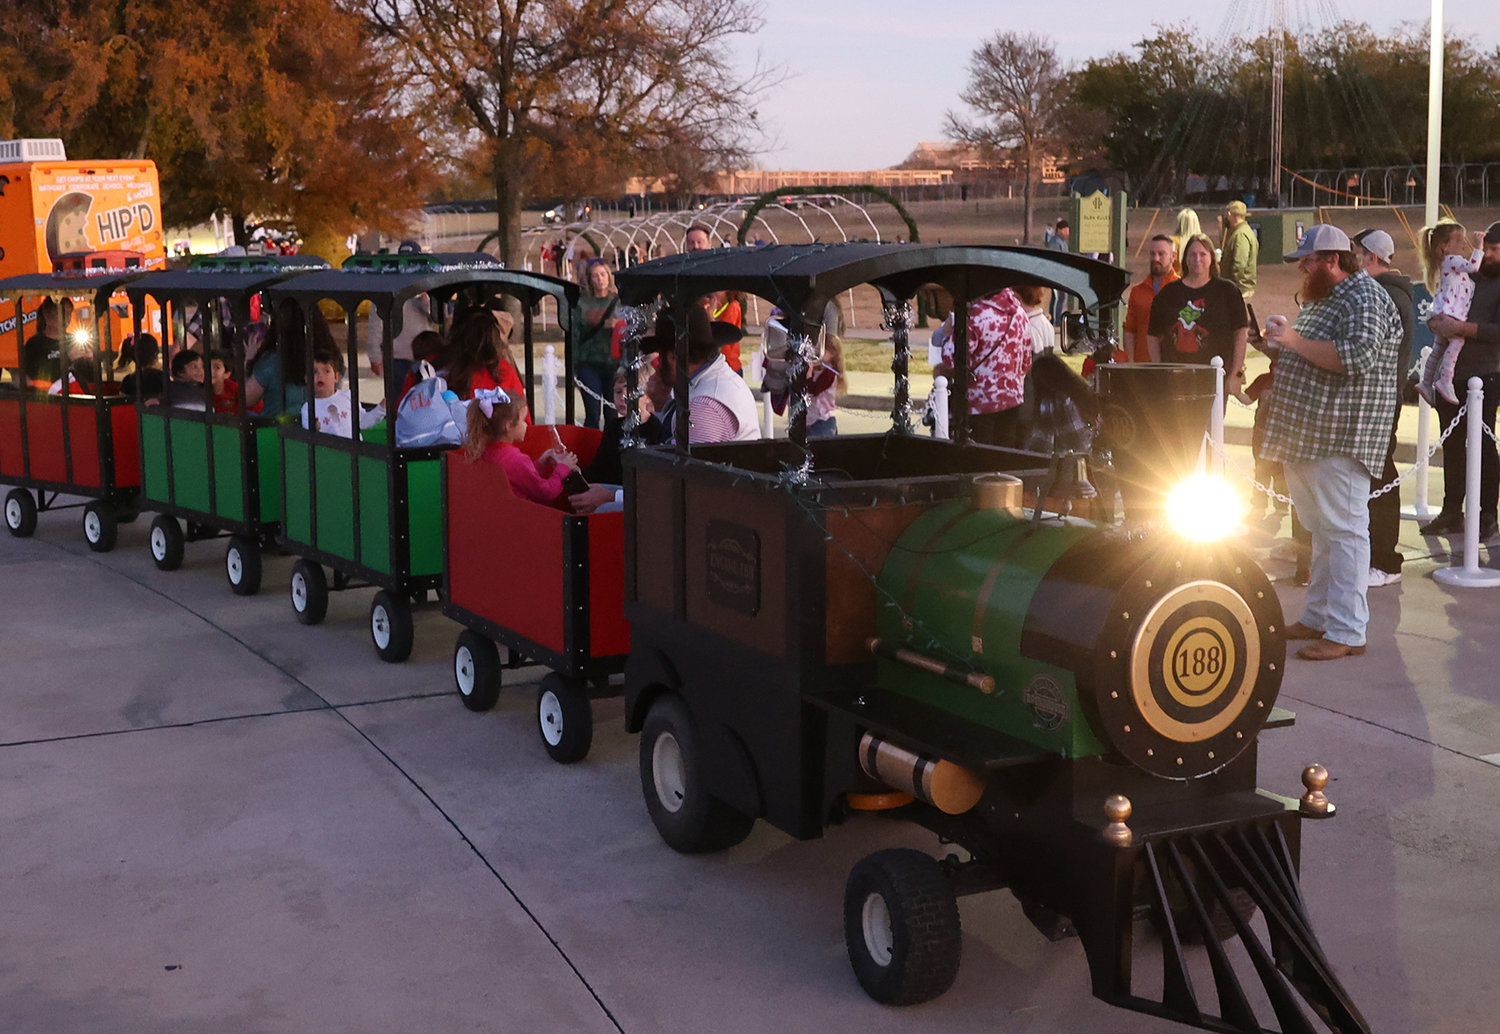 Patrons lined up for the mini train tride.